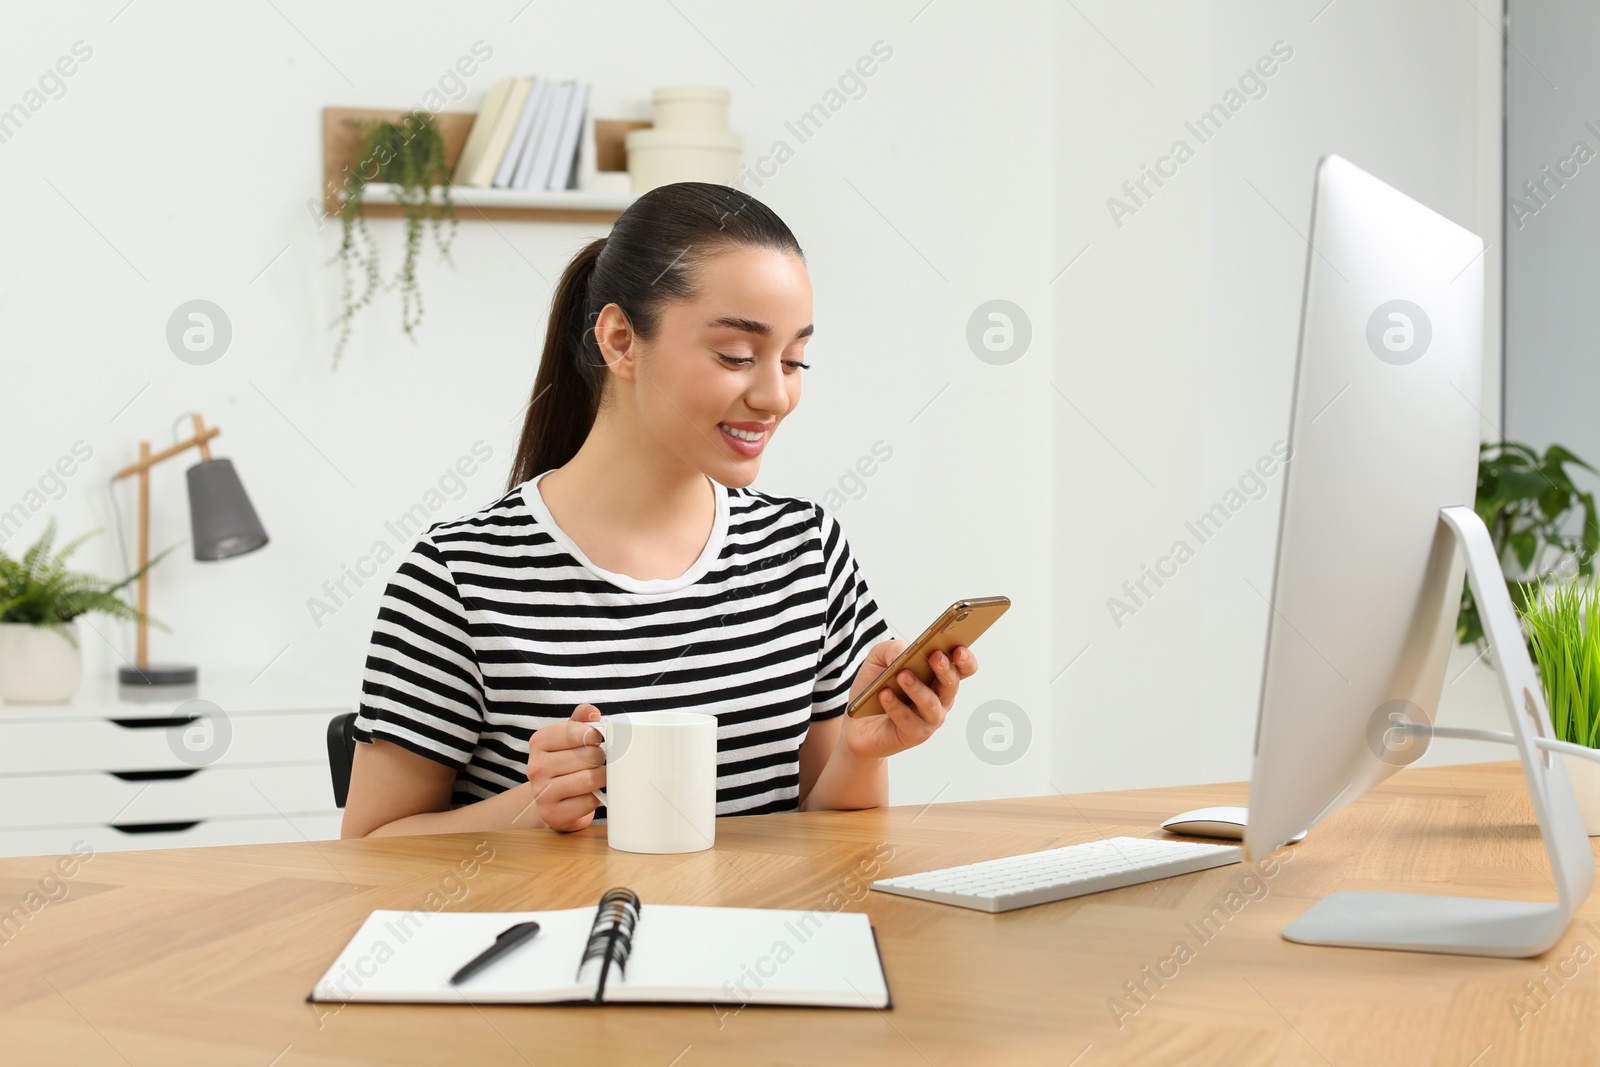 Photo of Home workplace. Happy woman with cup of hot drink looking at smartphone at wooden desk in room